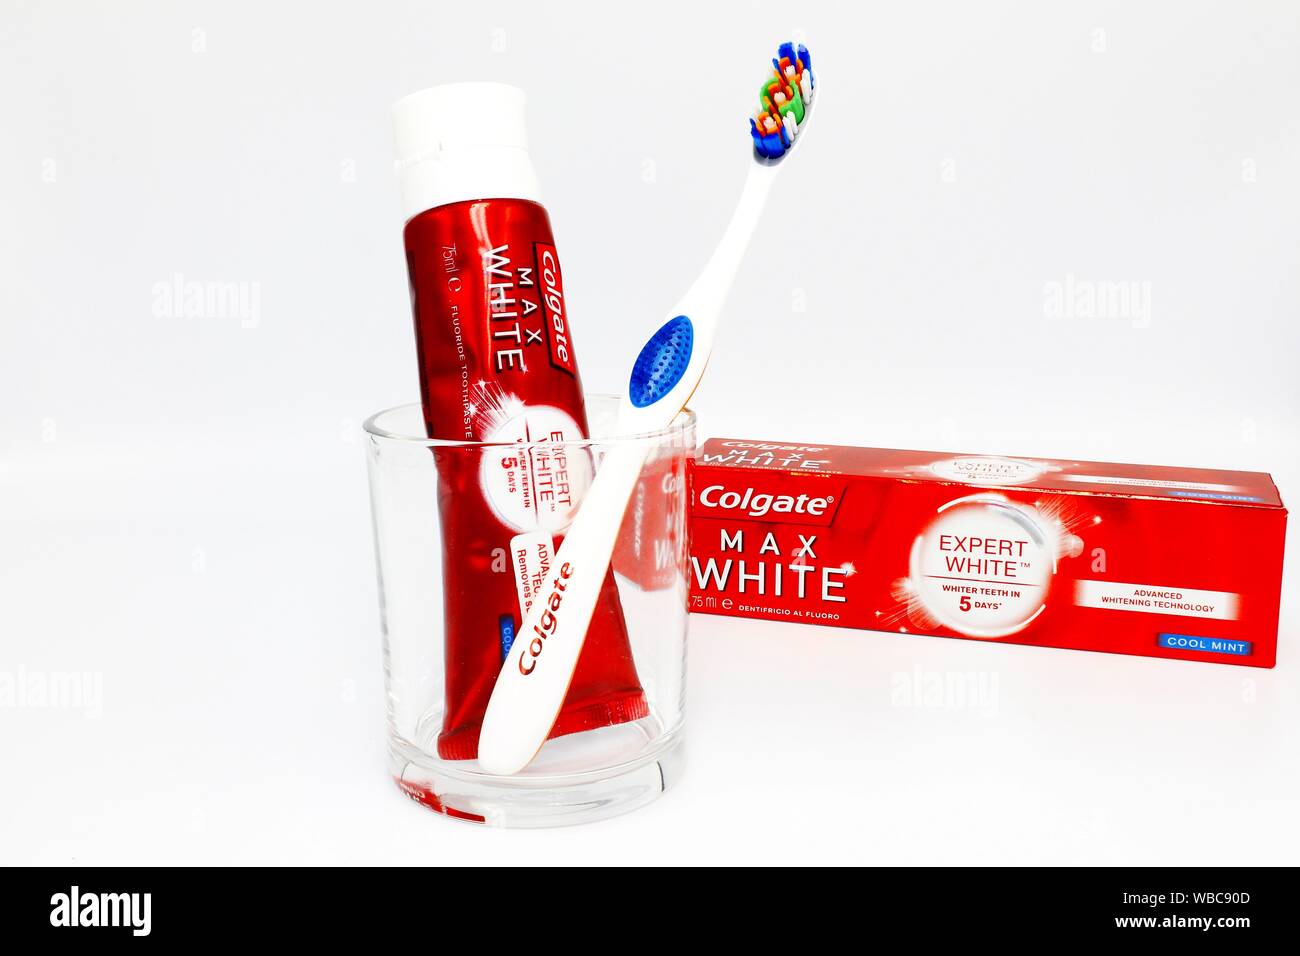 Colgate Max White High Resolution Stock Photography And Images Alamy